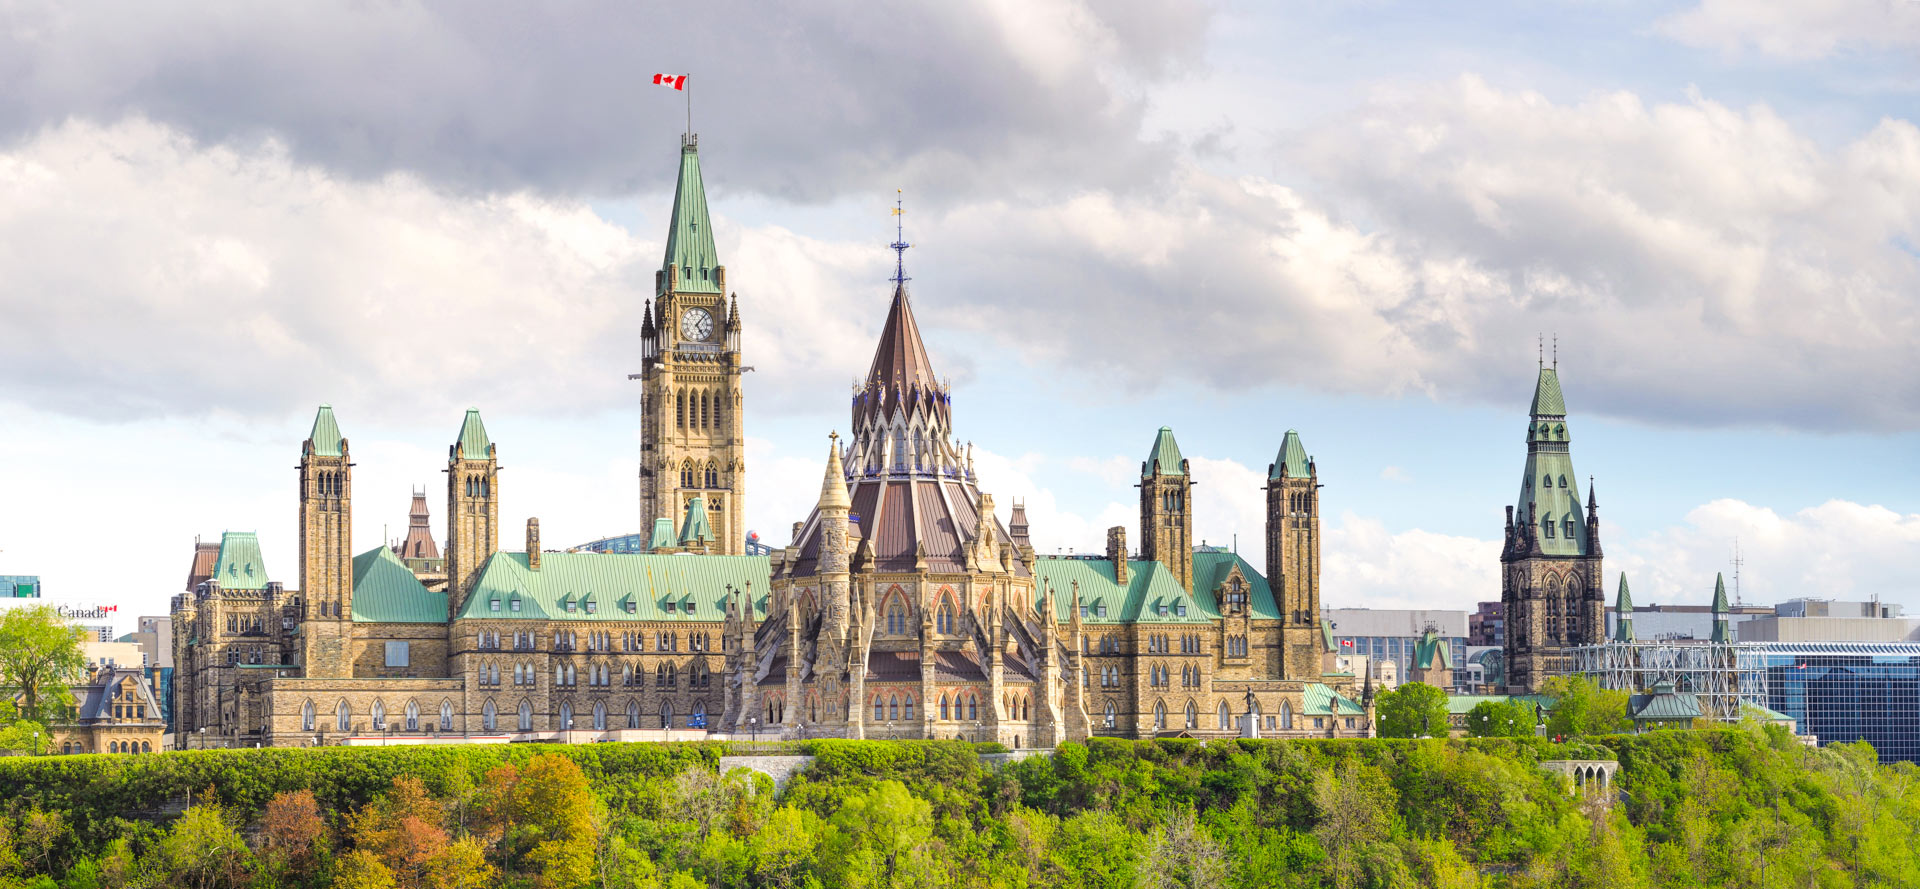 Ottawa and Parliament Hill - a week in Canada Itinerary